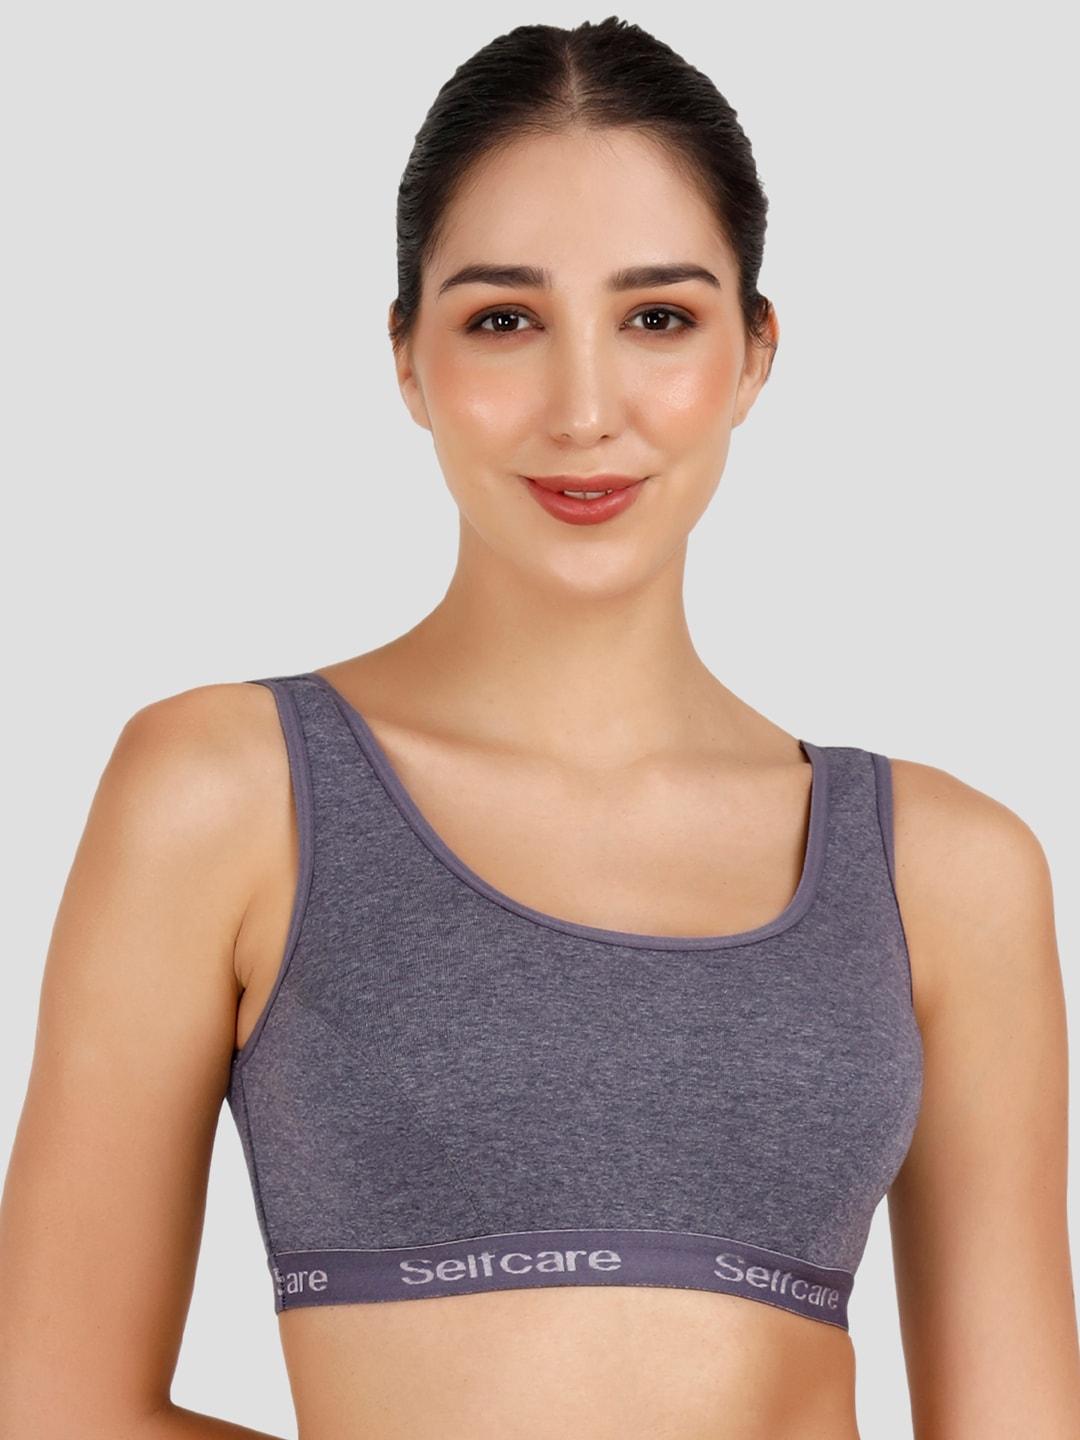 selfcare women thermal tops